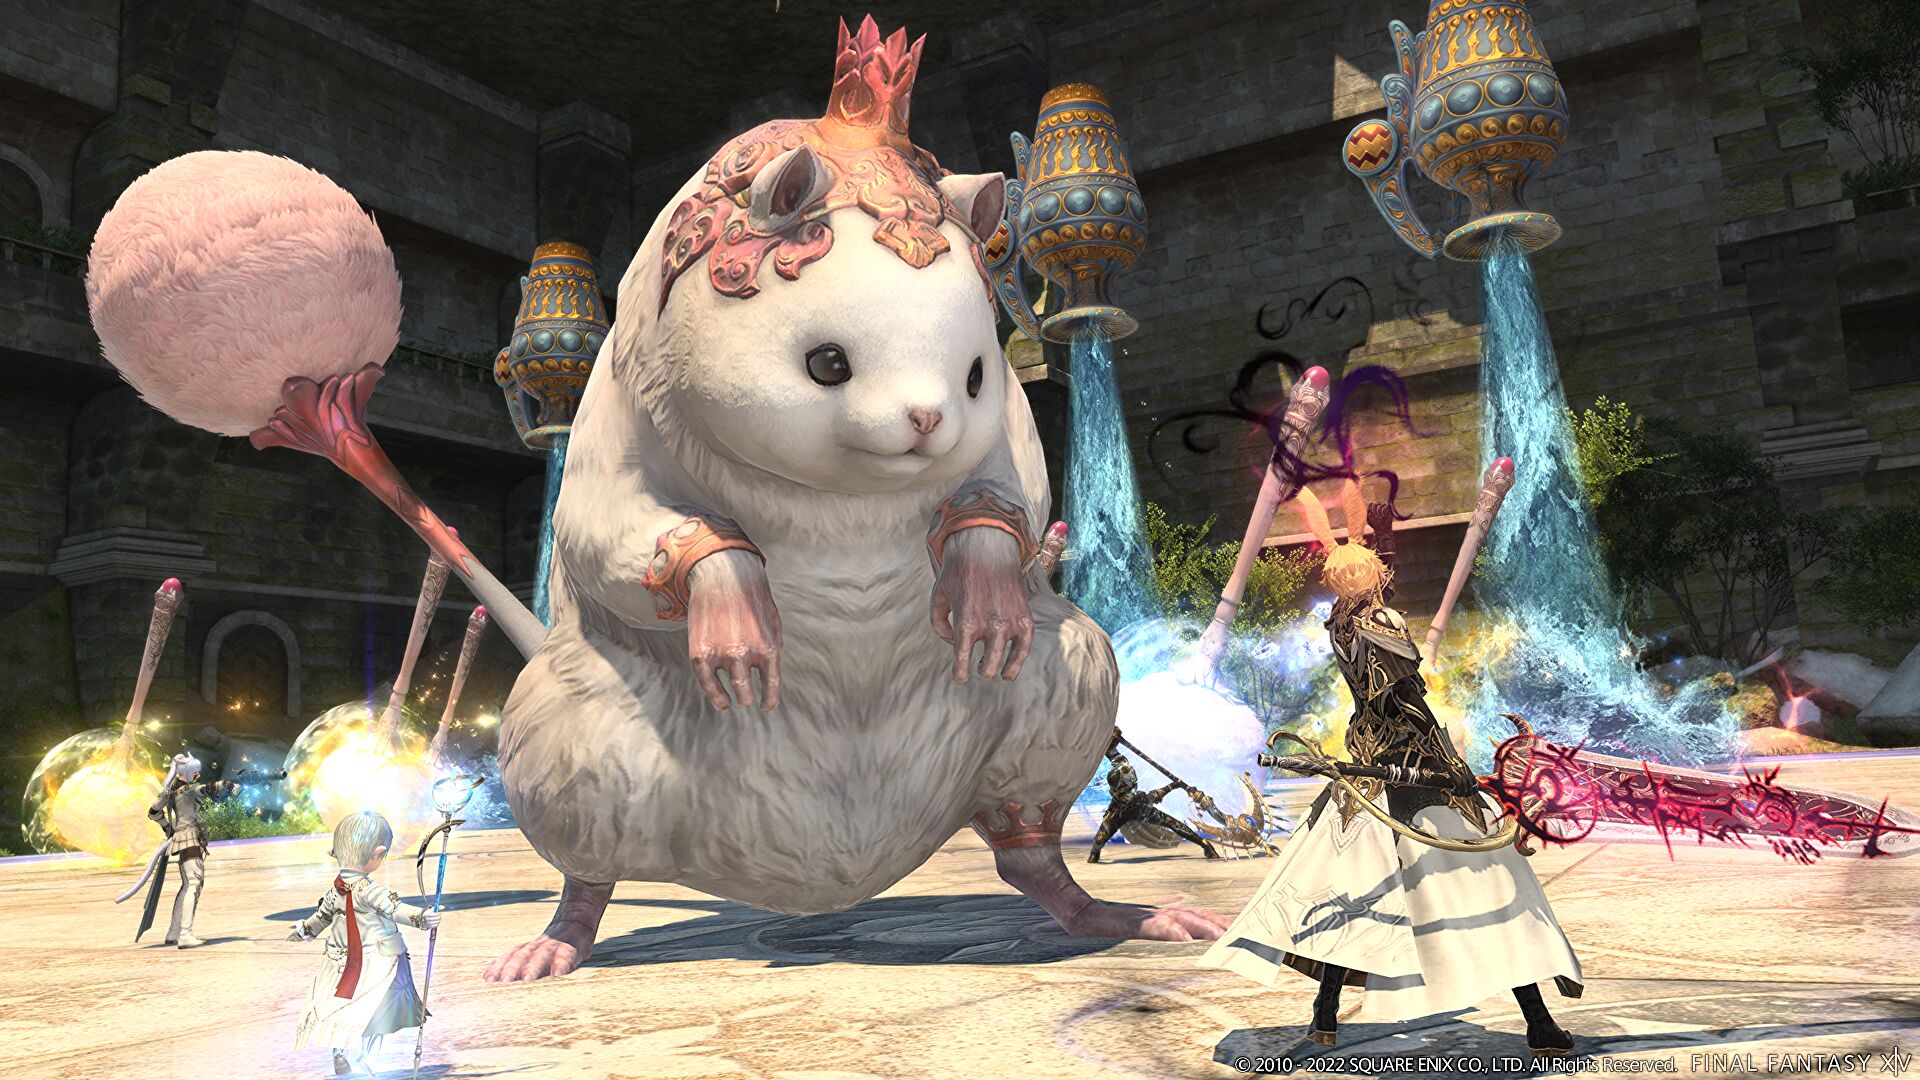 Final Fantasy 14 Online patch 6.2, Buried Memory, has a release date